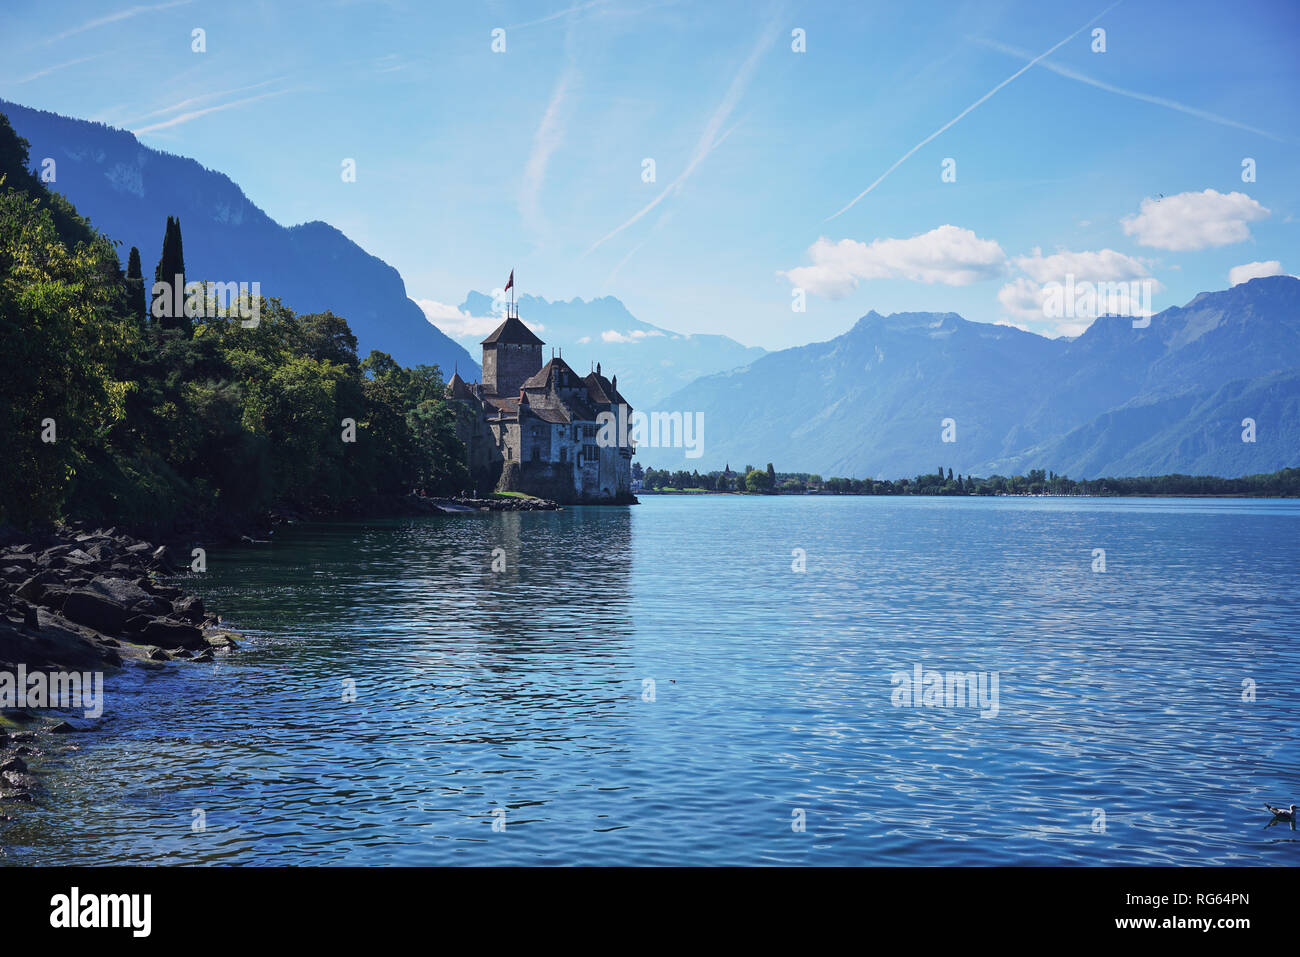 Chateau de Chillon Castle and mountains. It is a medieval fortress on Lake Geneva (Lac Leman), near Montreux, canton of Vaud, Switzerland Stock Photo